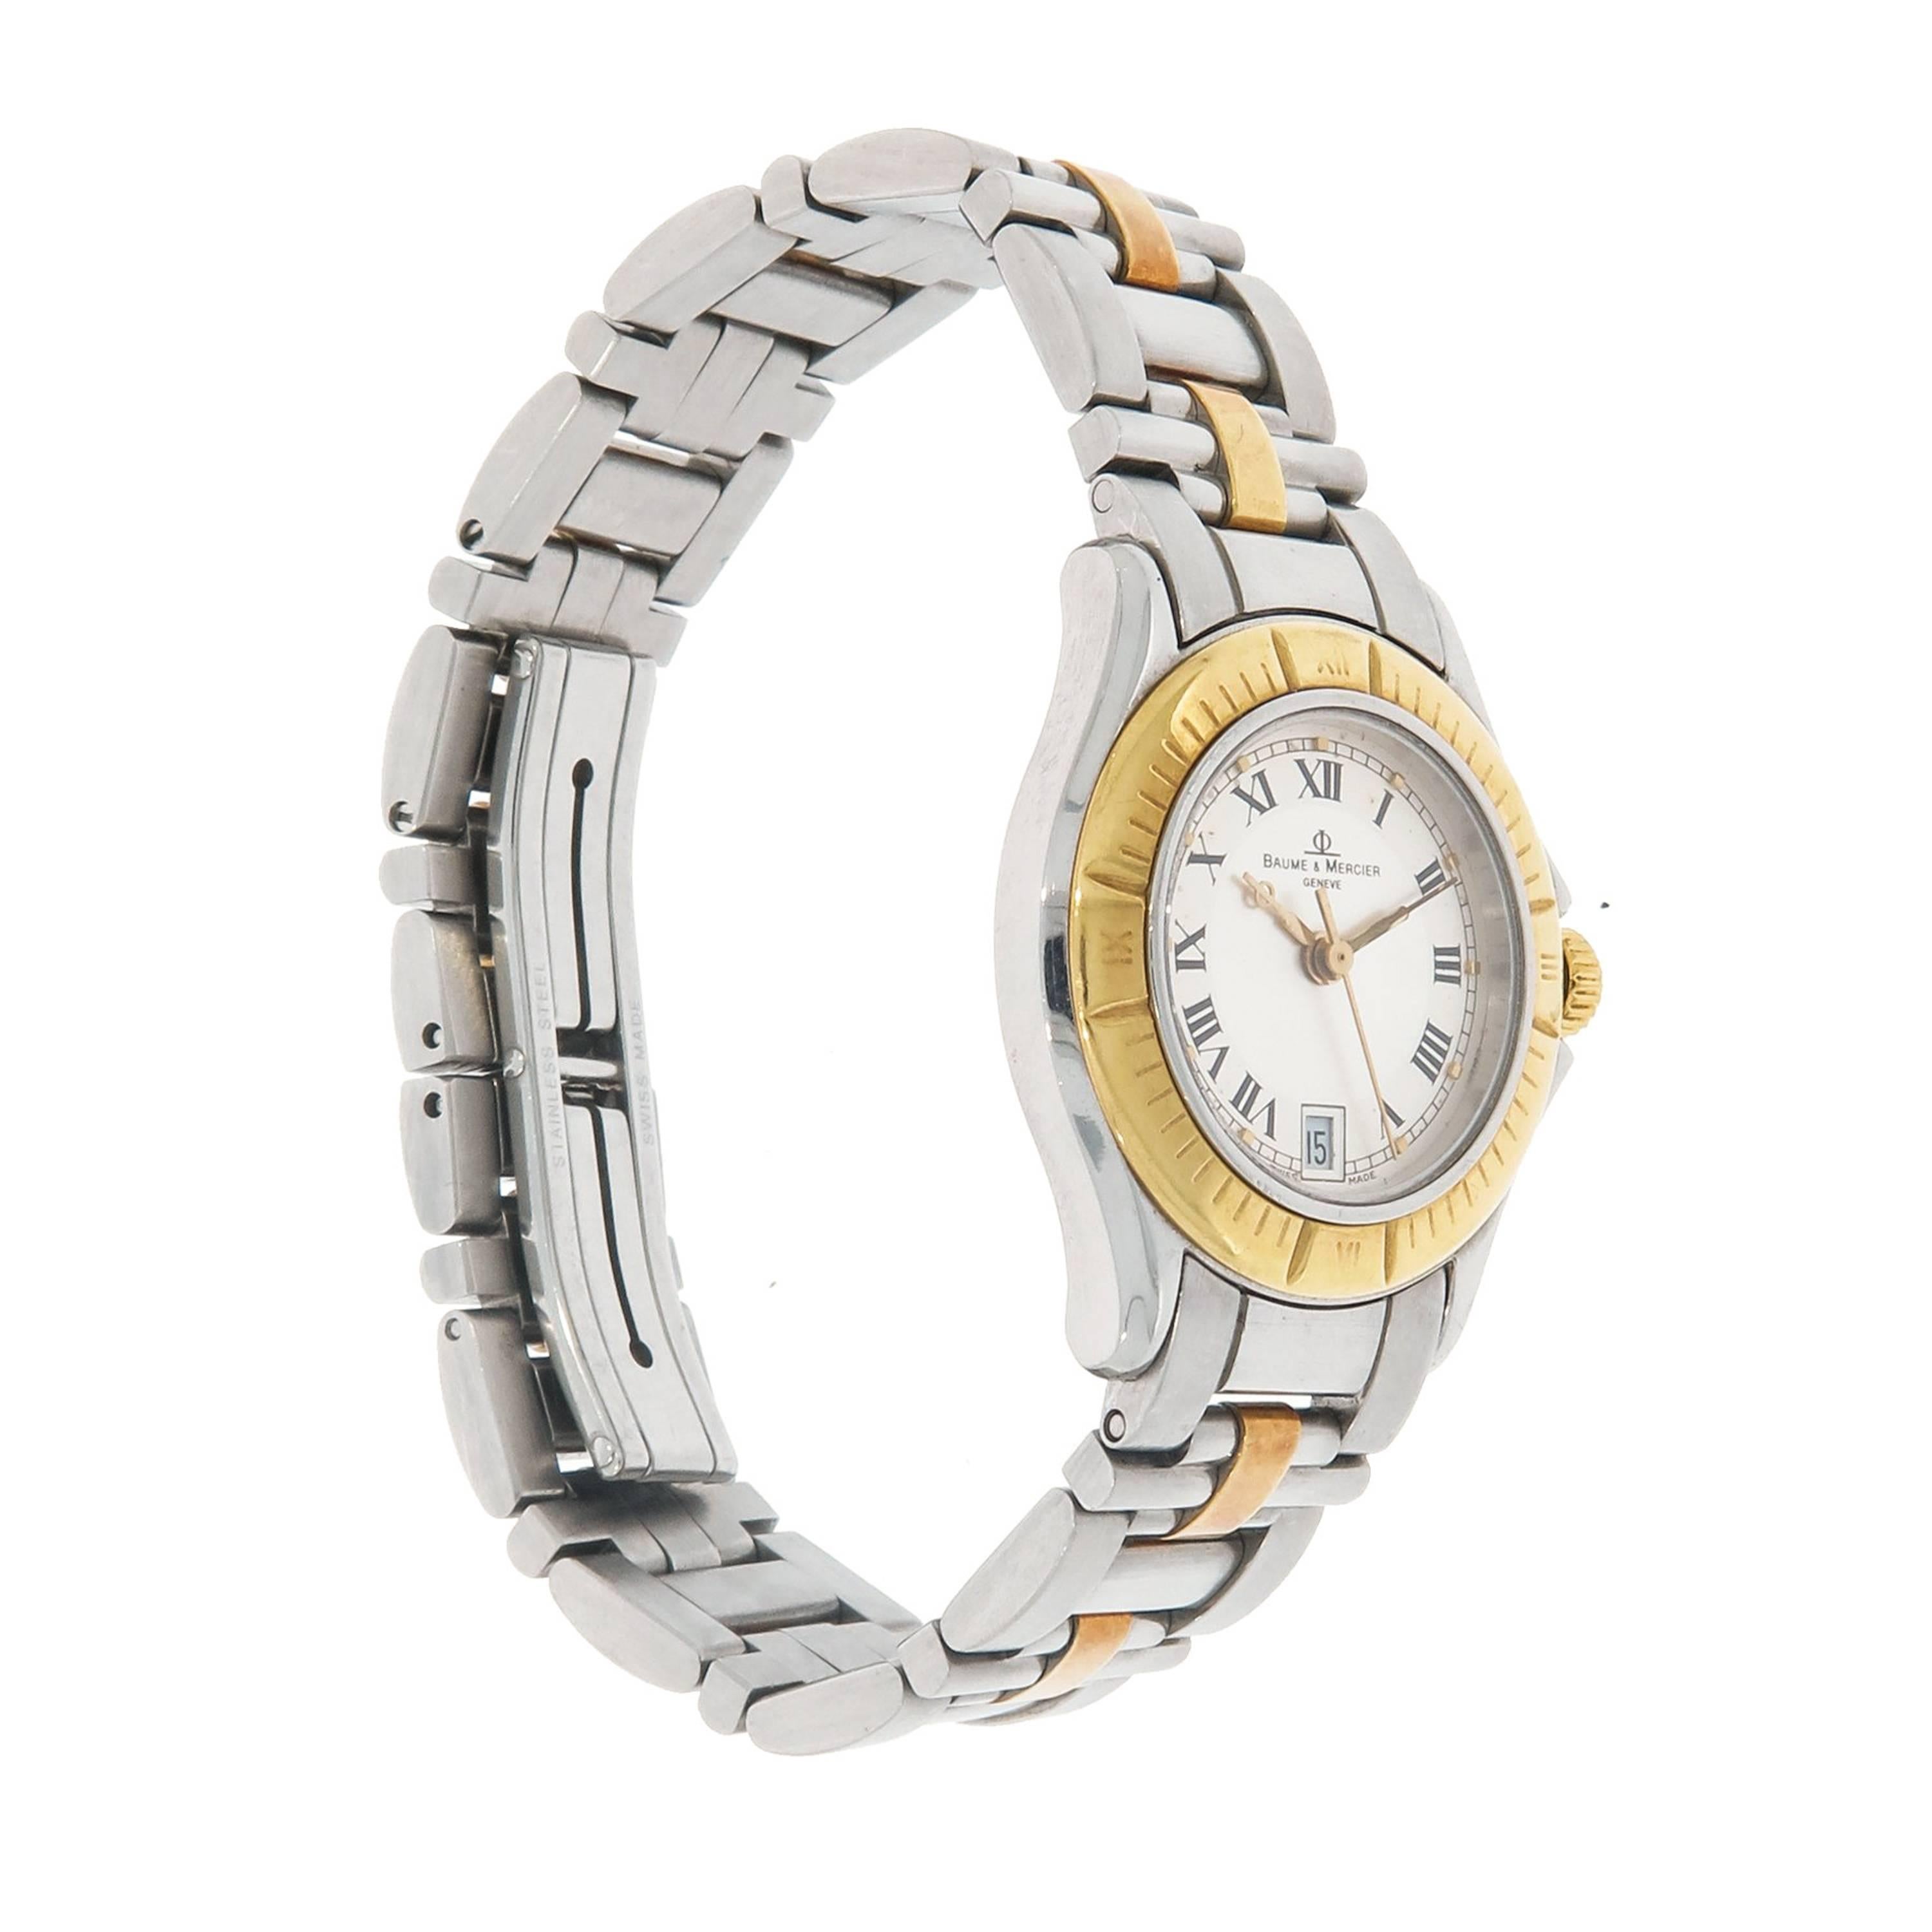 Baume & Mercier Malibu crafted in stainless steel and yellow gold.  
This timepiece features a quartz movement with indications for the Hours, Minutes, Seconds and Date.  The case measures 28mm in diameter with a total thickness of 5.8mm.  
We have